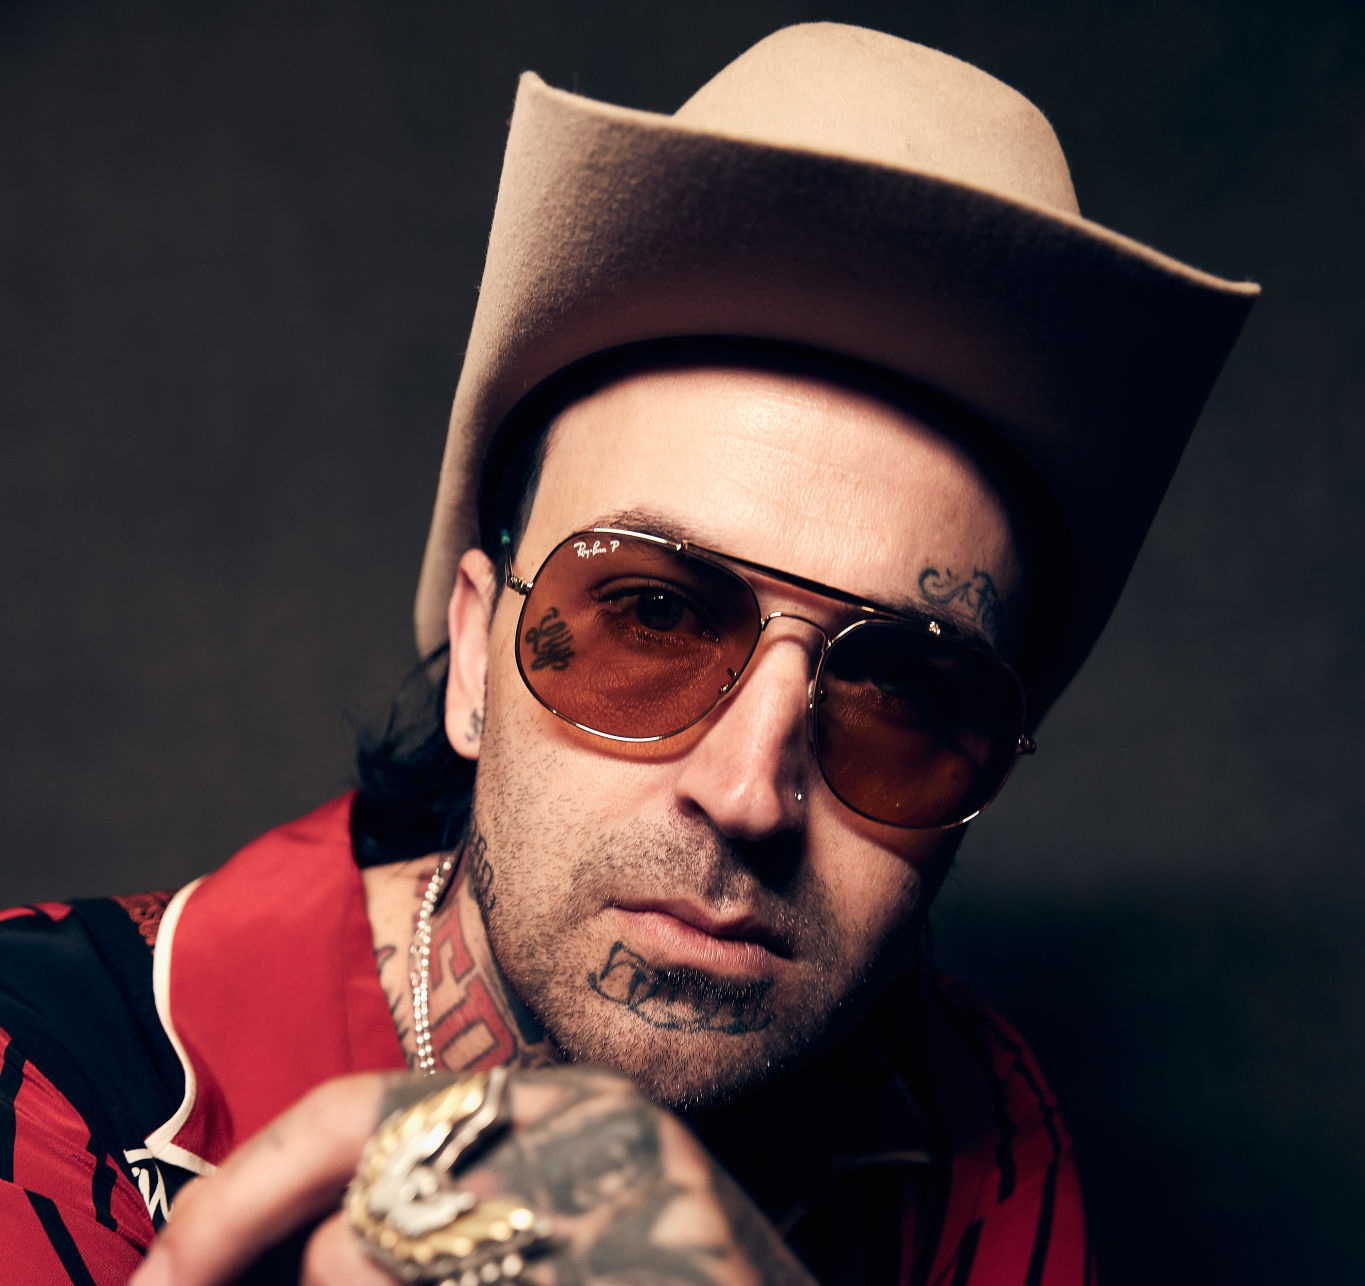 AUSTIN, TX - MARCH 10: Yelawolf of the film 'The Peanut Butter Falcon' poses for a portrait at the 2019 SXSW Film Festival Portrait Studio on March 10, 2019 in Austin, Texas. (Photo by Robby Klein/Contour by Getty Images)